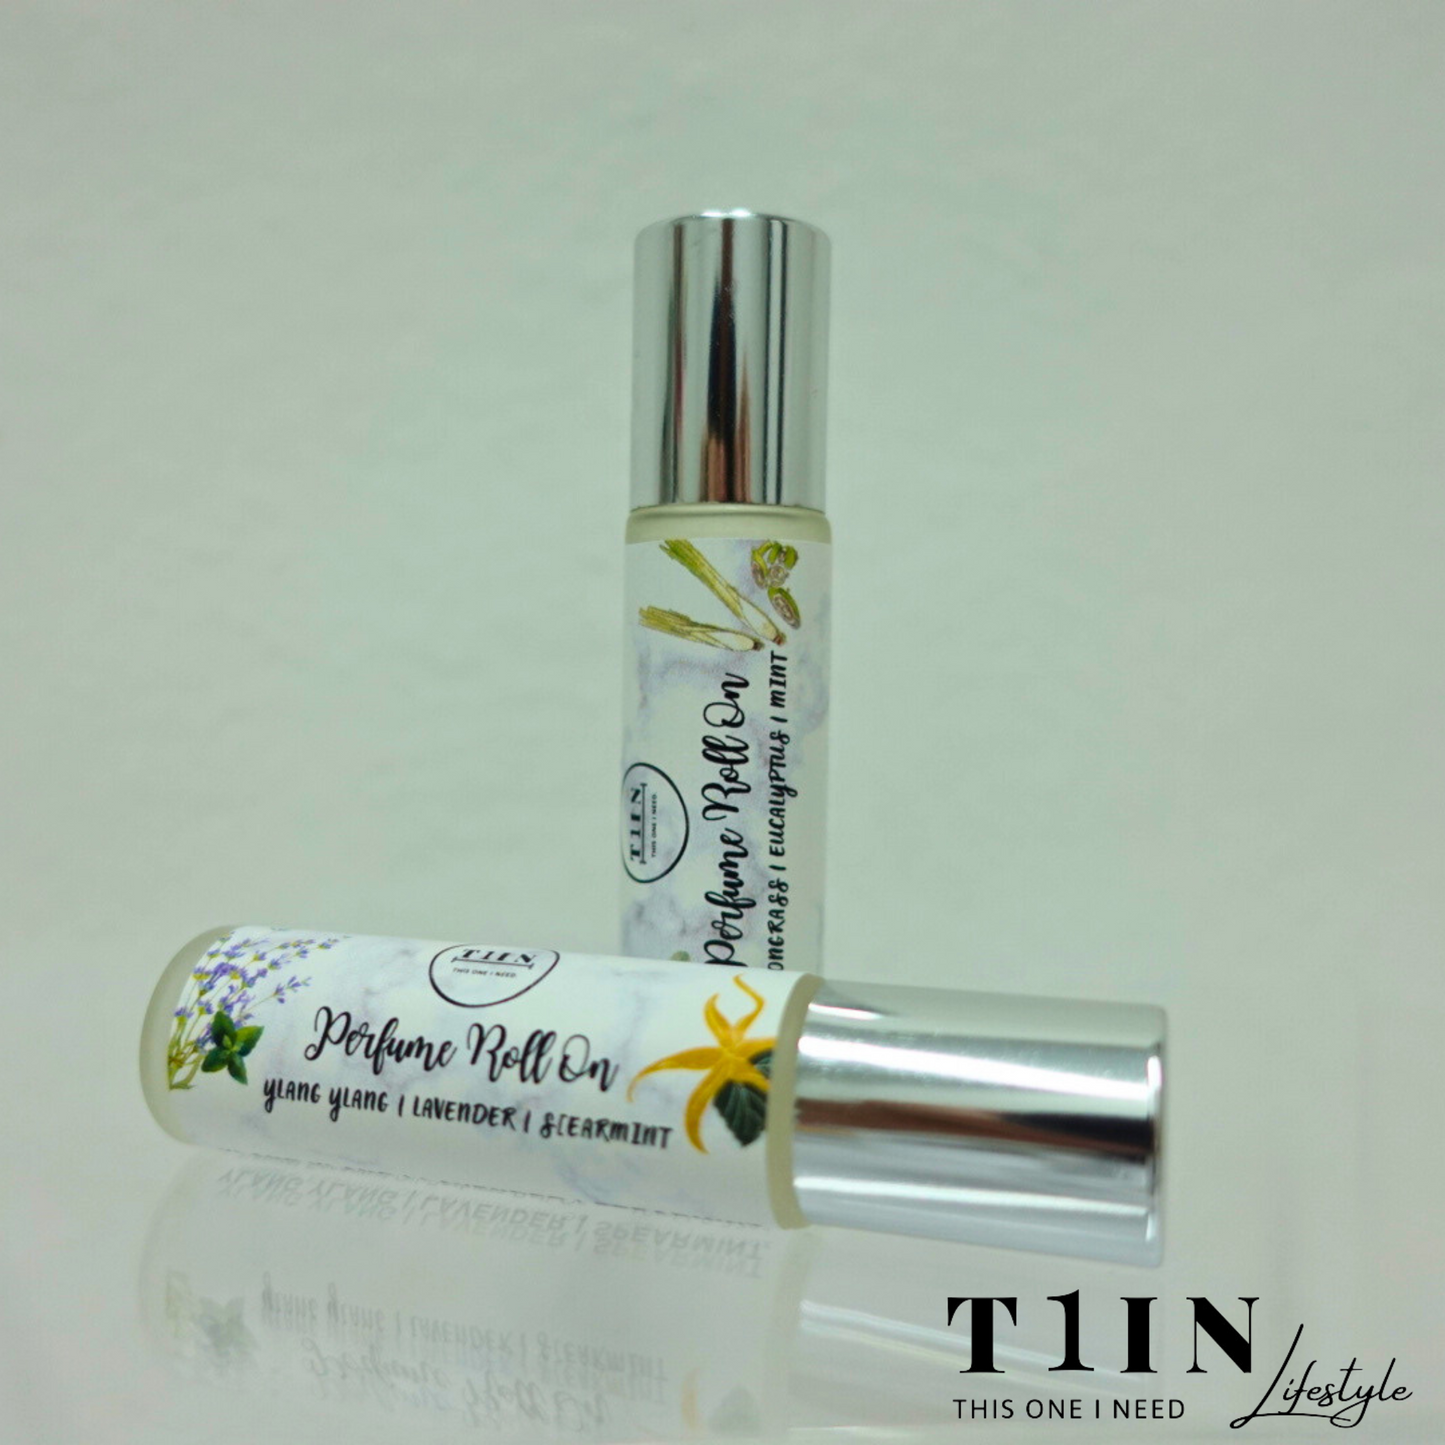 T1IN: 10mL Perfume Roll Lavender | Ylang Ylang | Spearmint